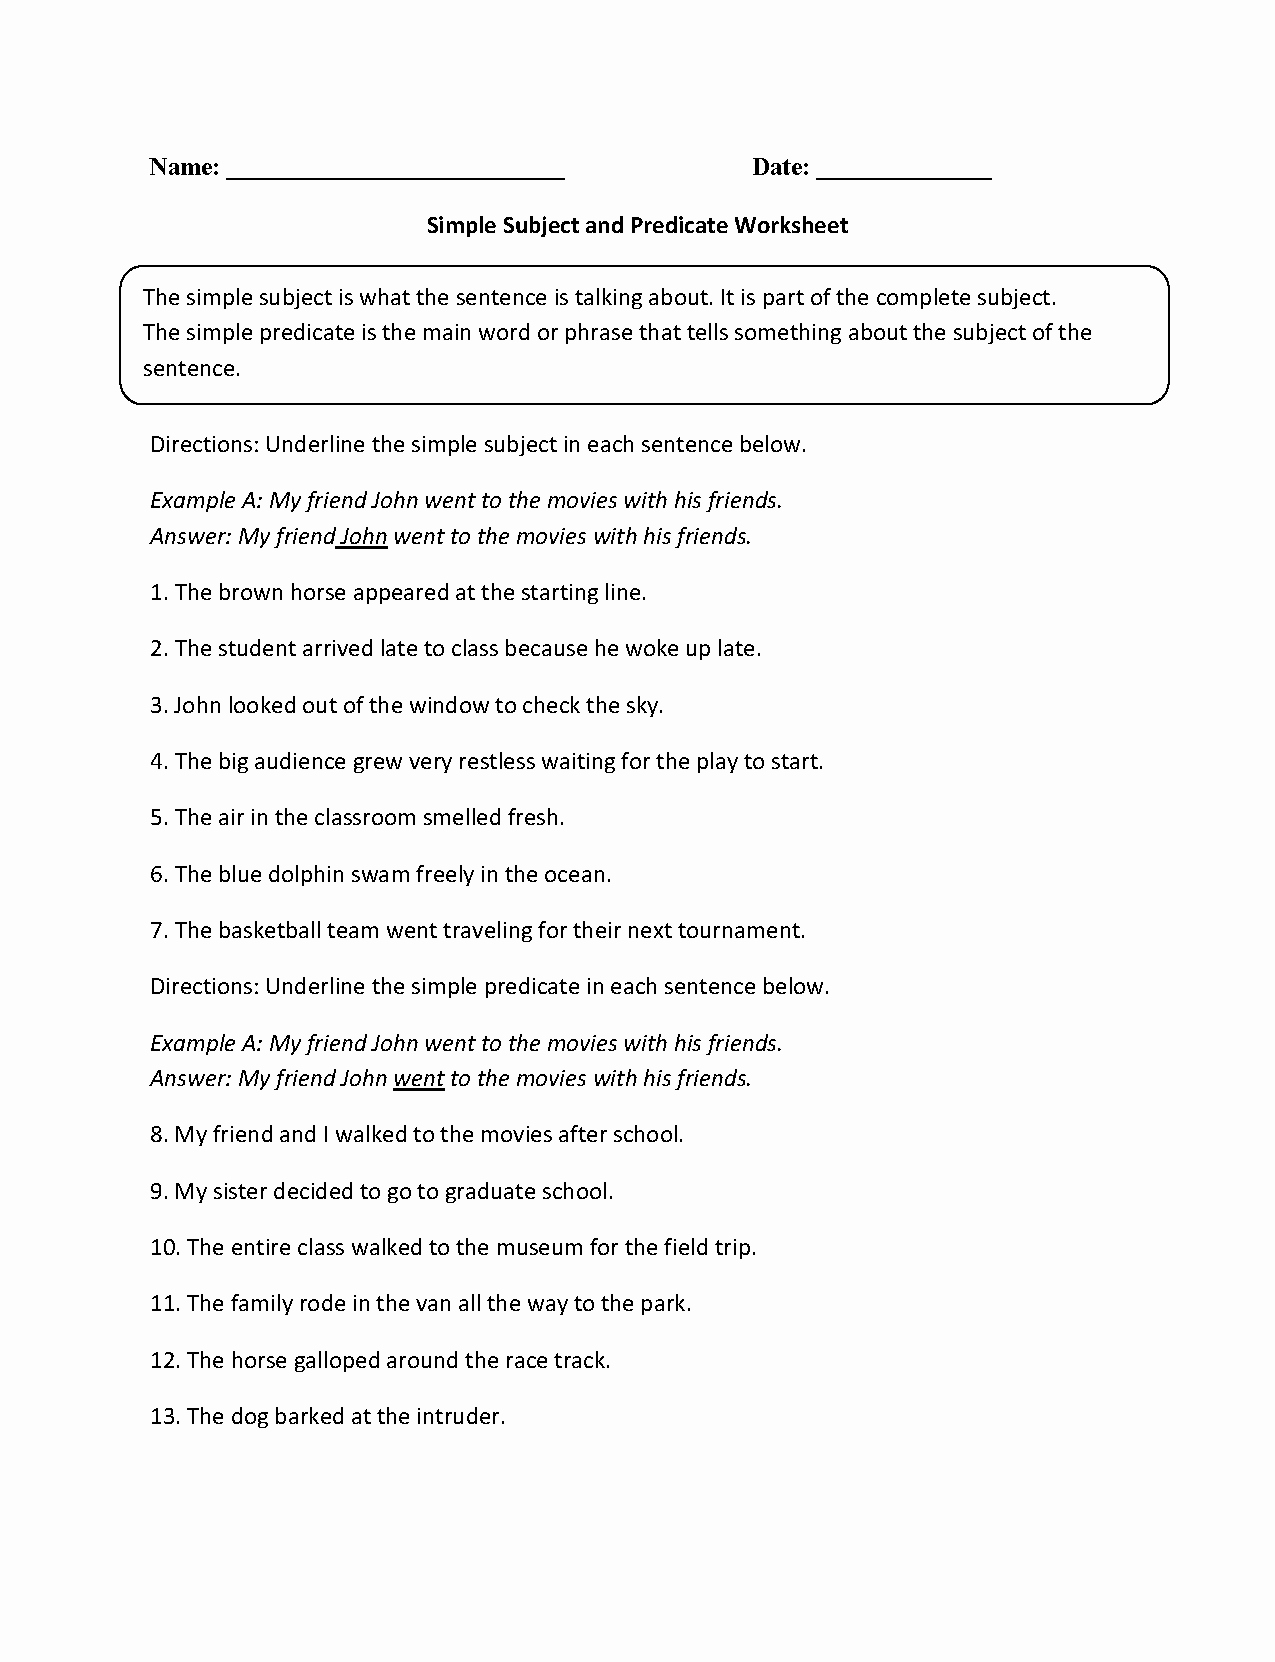 Subject and Predicate Worksheet Unique Simple Subject and Predicate Worksheet